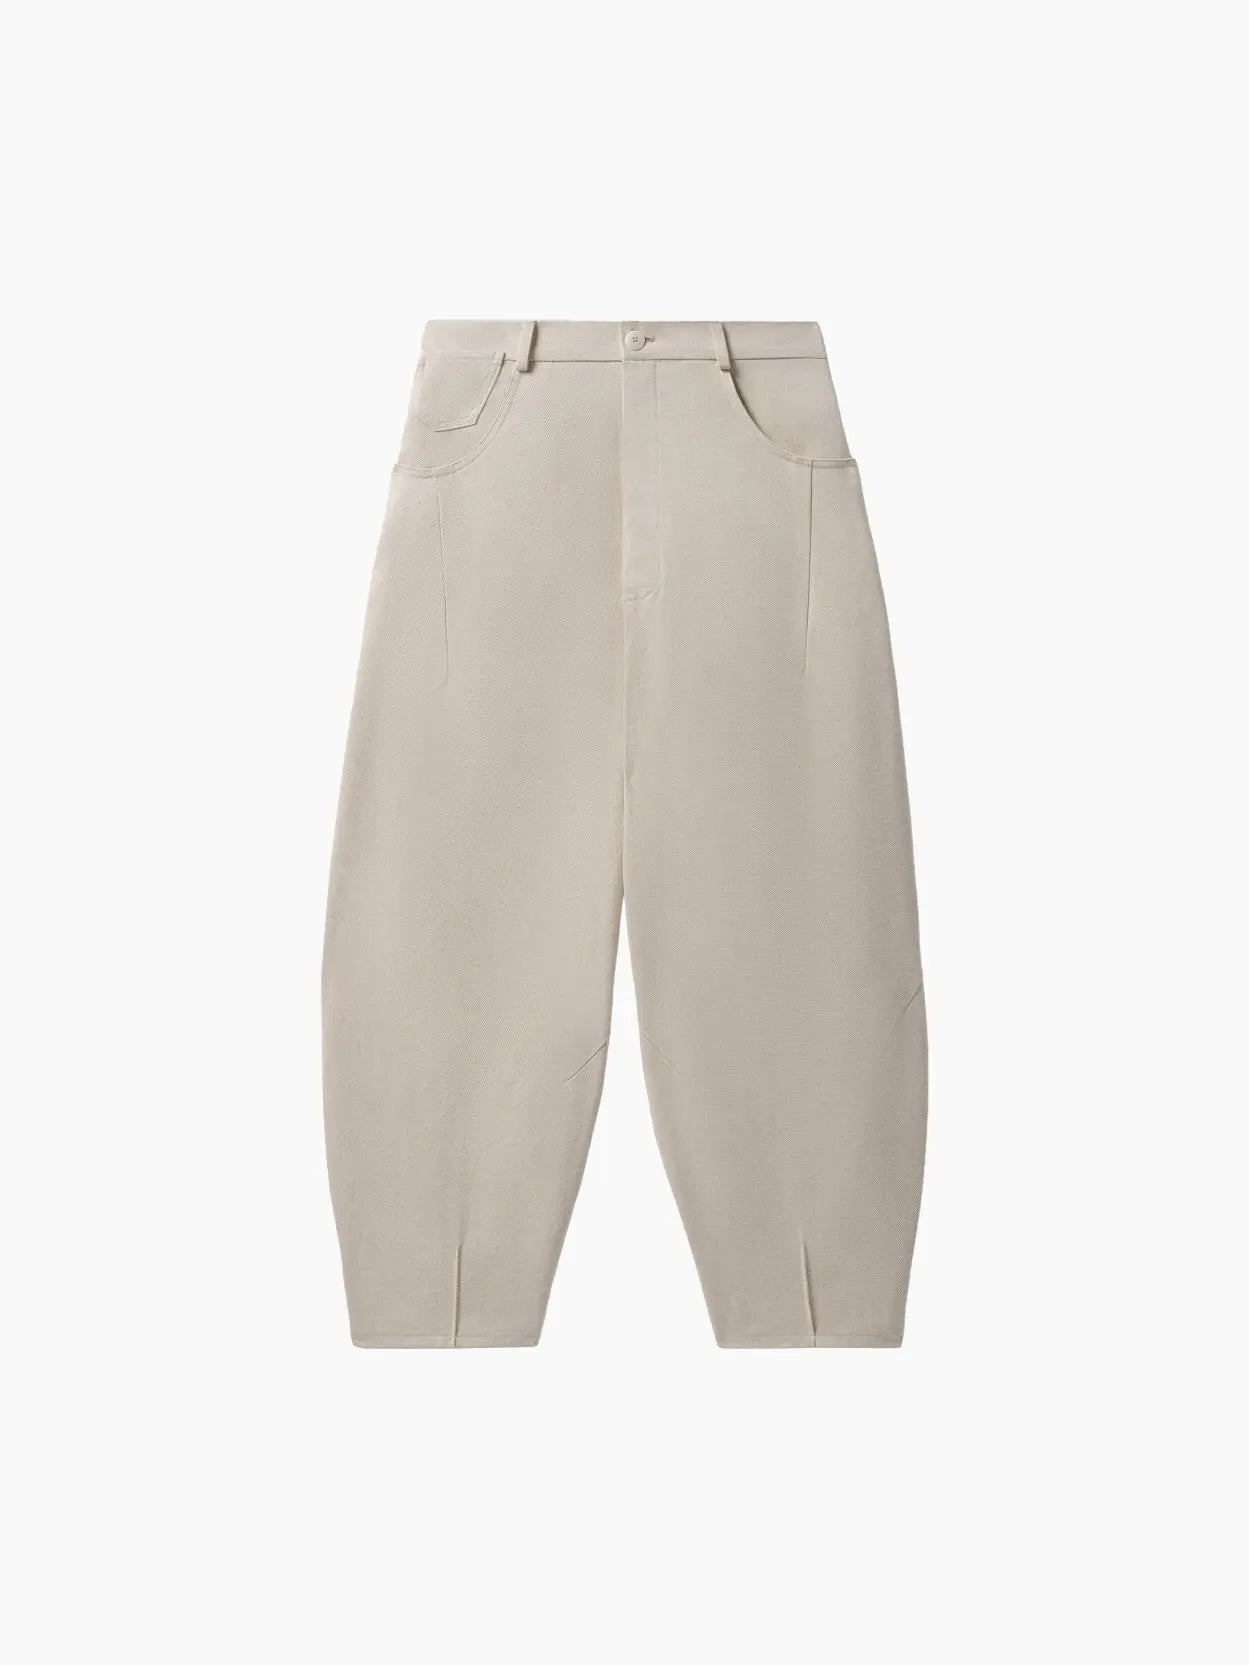 A pair of beige Baggy Pants Alabaster by Cordera with a high waist and a loose, slightly tapered fit, available at Bassal Store in Barcelona. The pants feature a button and zipper closure, belt loops, and front pockets. The fabric appears smooth and lightweight.